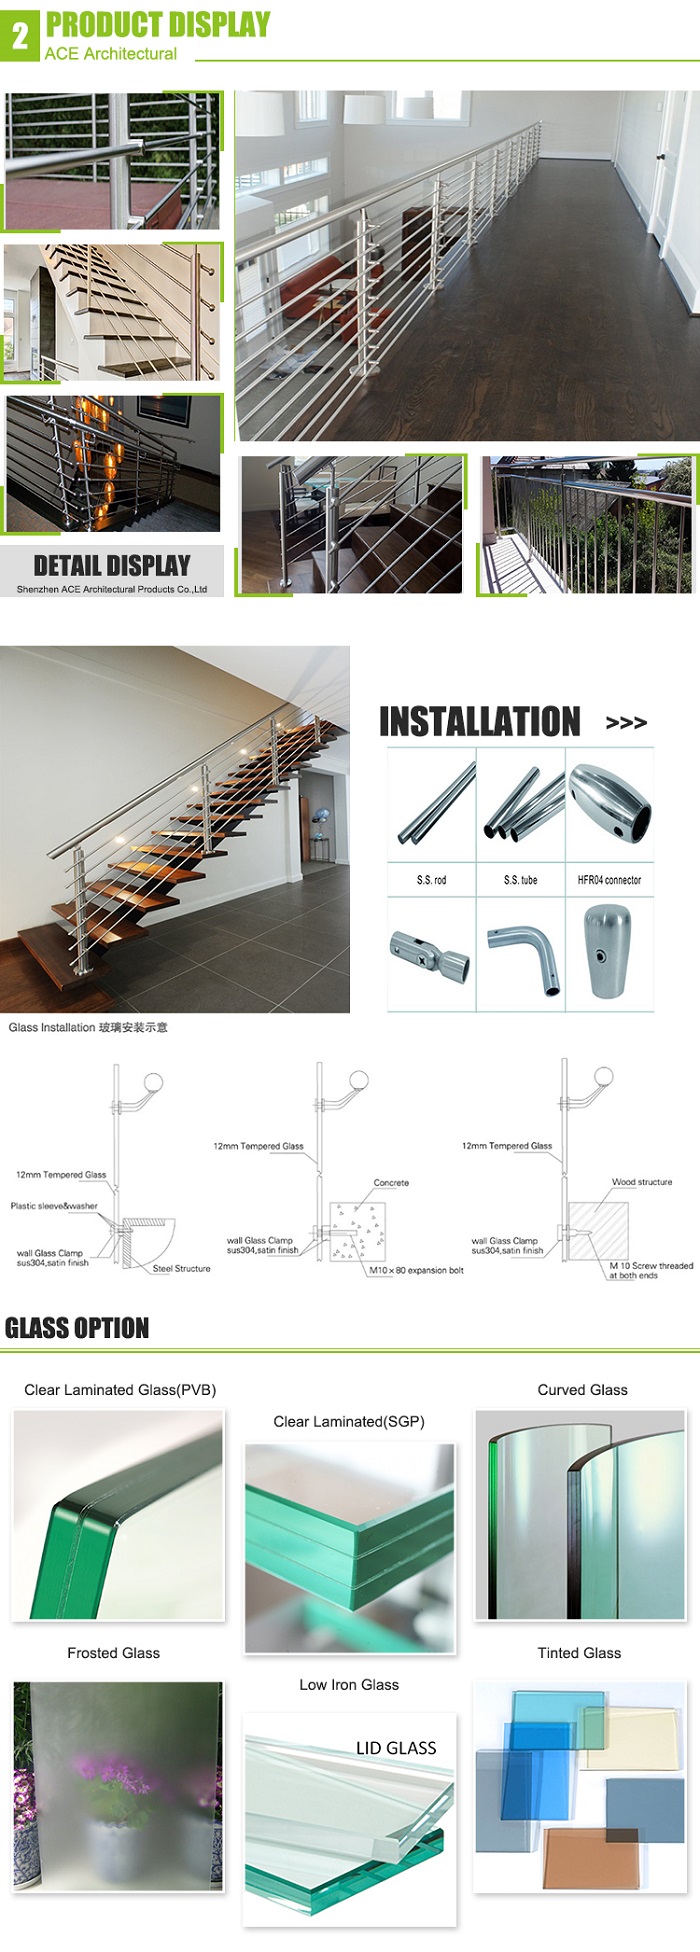 Premade handrails for deck stairs with stainless steel structure